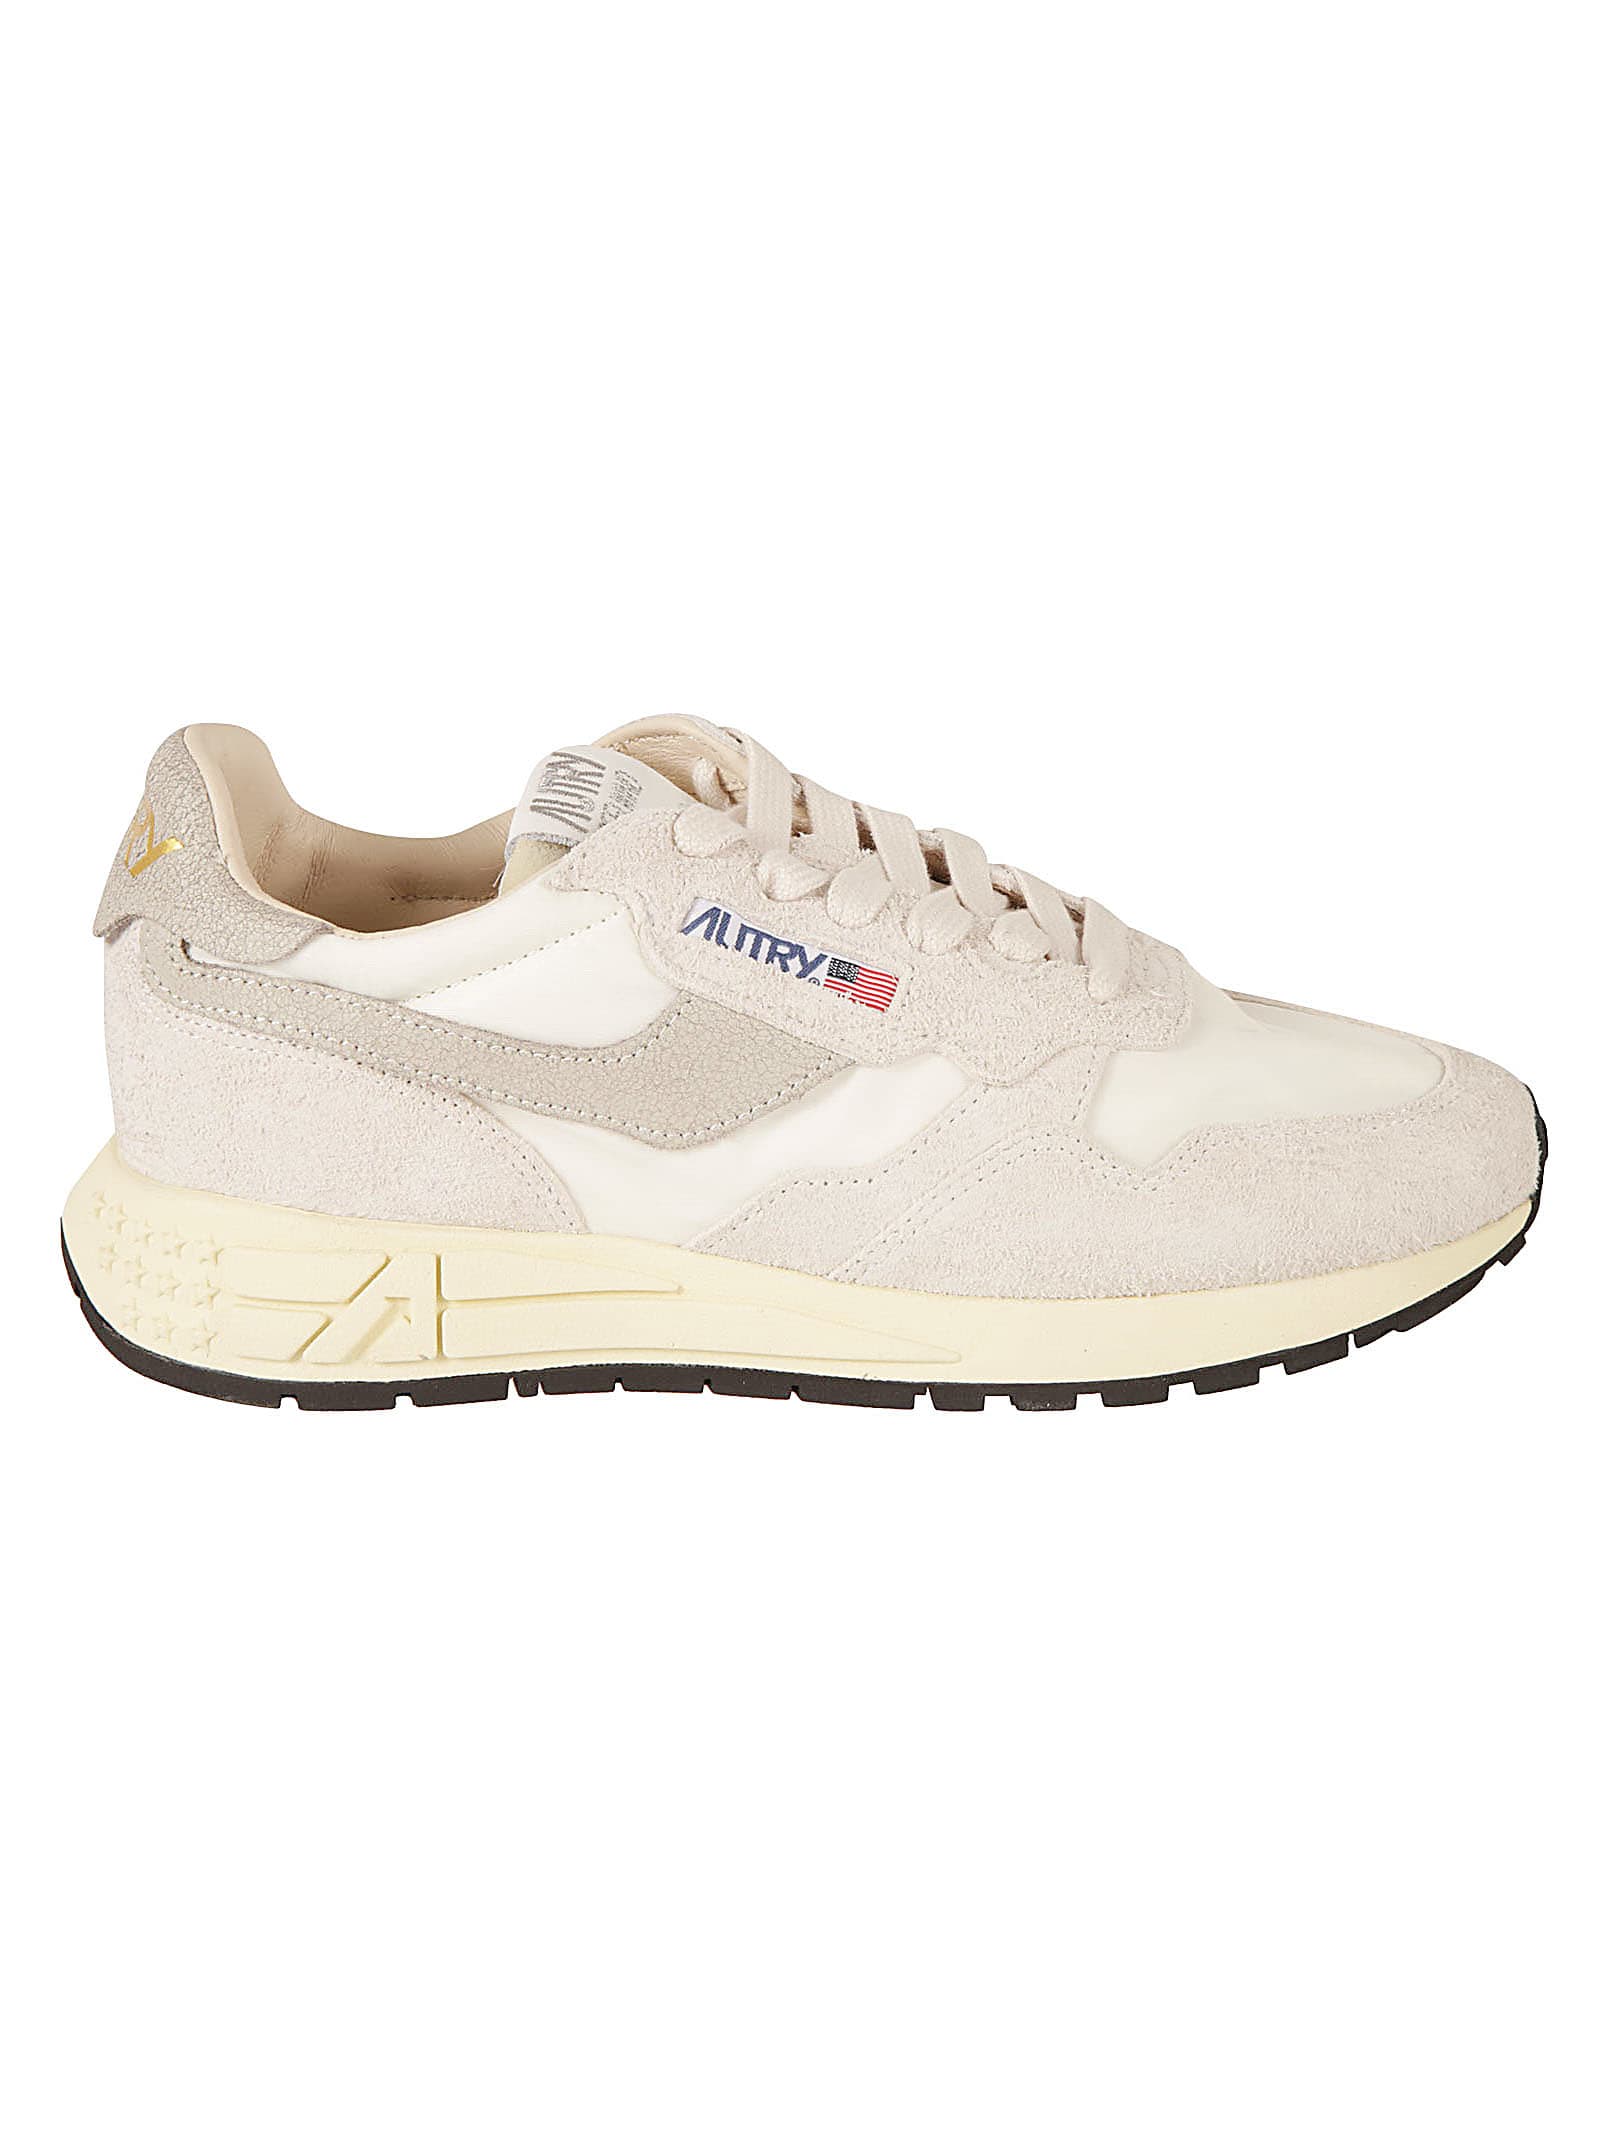 Autry Logo Patched Paneled Sneakers In White/natural